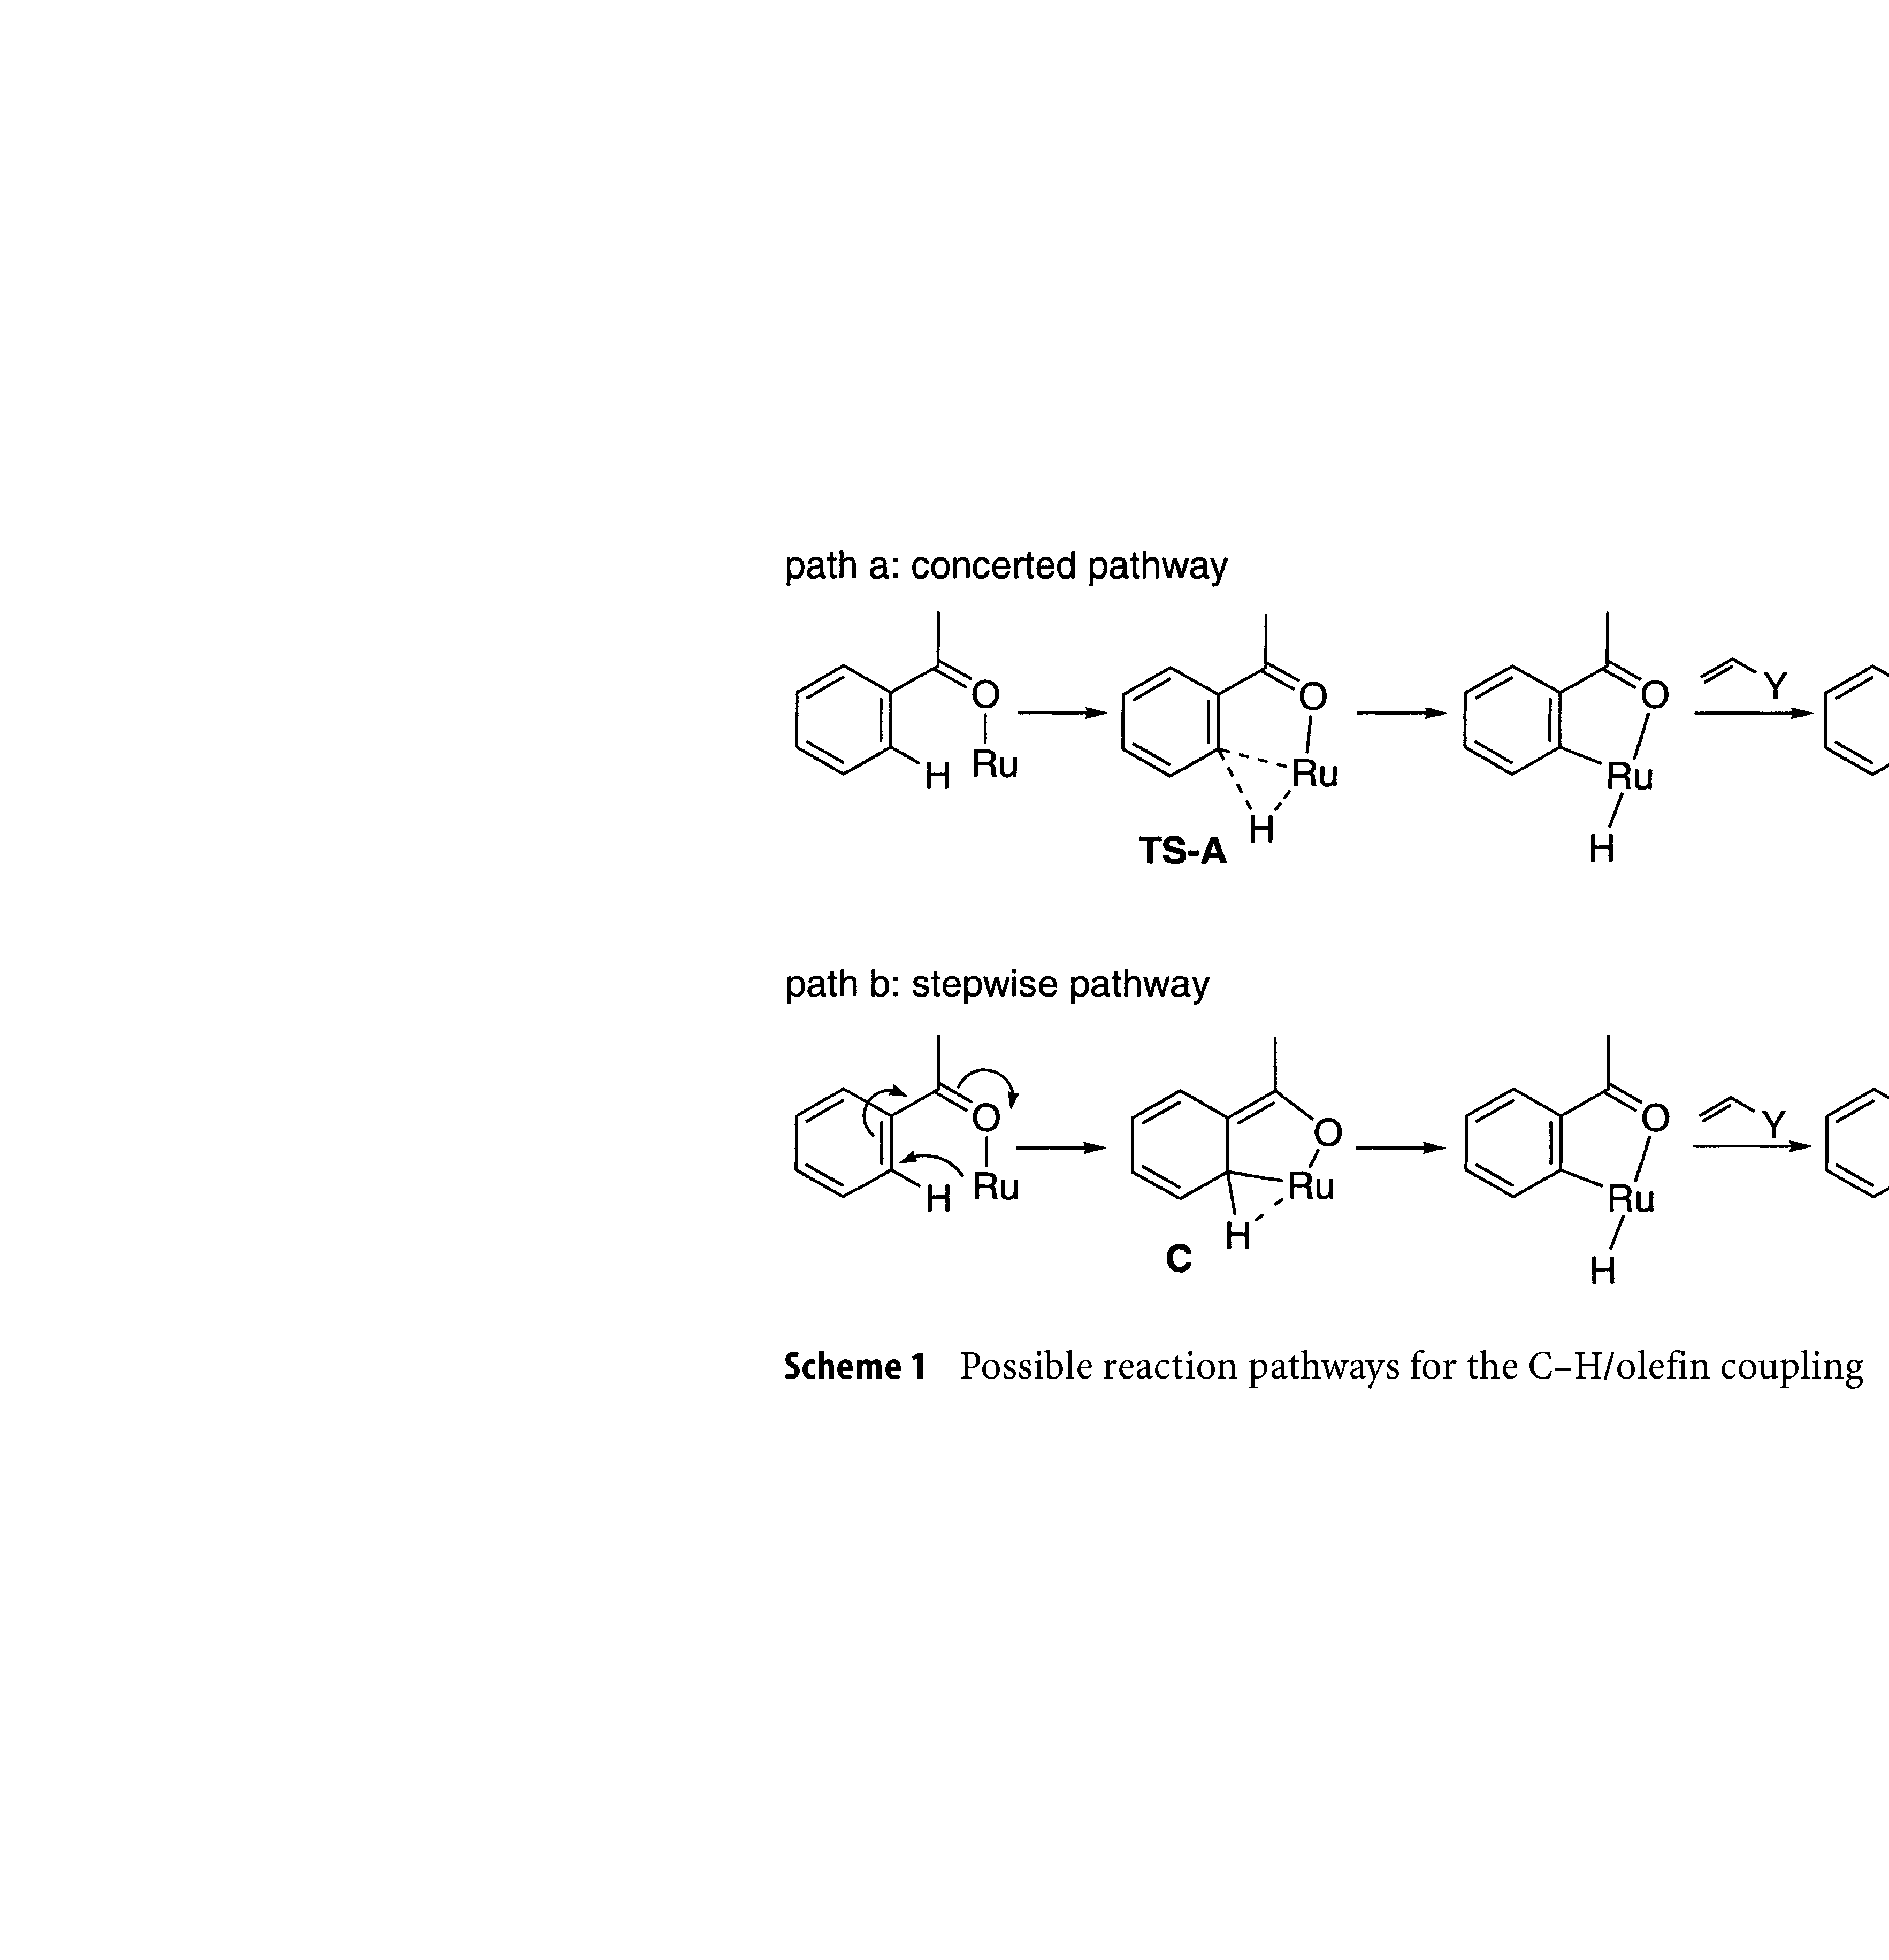 Scheme 1 Possible reaction pathways for the C-H/olefin coupling...